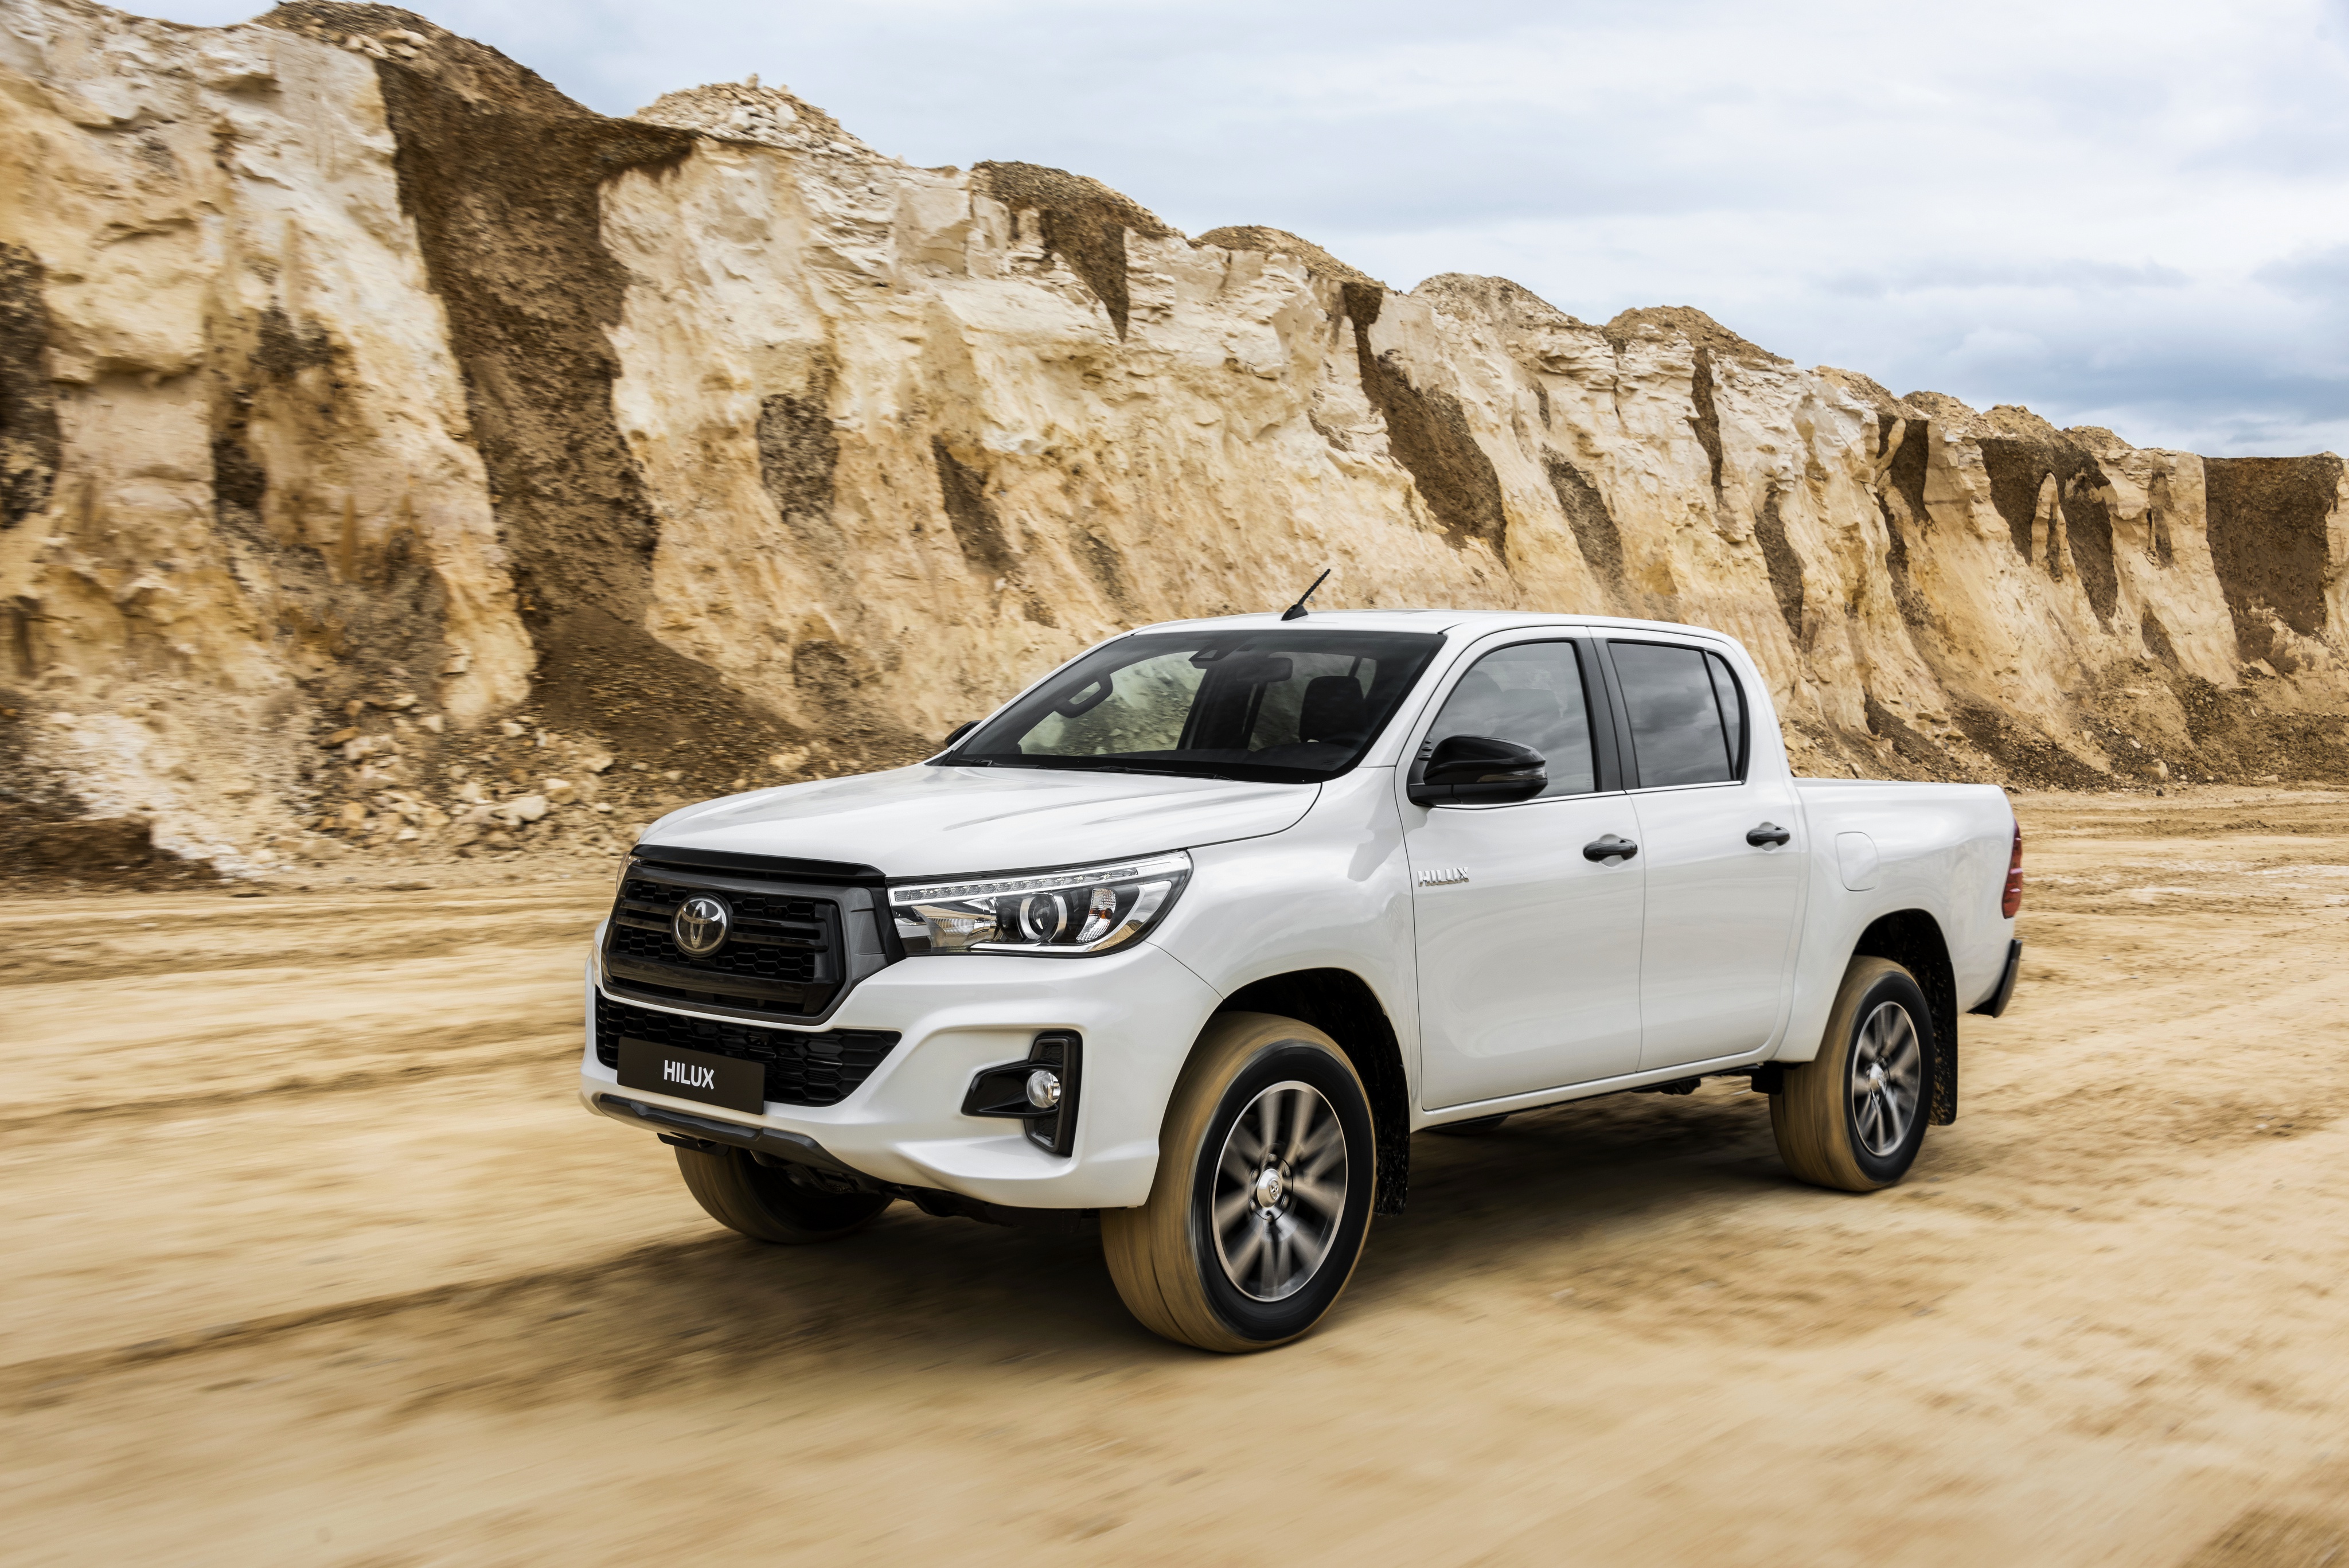 Free download Toyota Hilux 4k Ultra HD Wallpaper Background Image 4096x2734 [4096x2734] for your Desktop, Mobile & Tablet. Explore Hilux Wallpaper. Hilux Wallpaper, Toyota Hilux Wallpaper